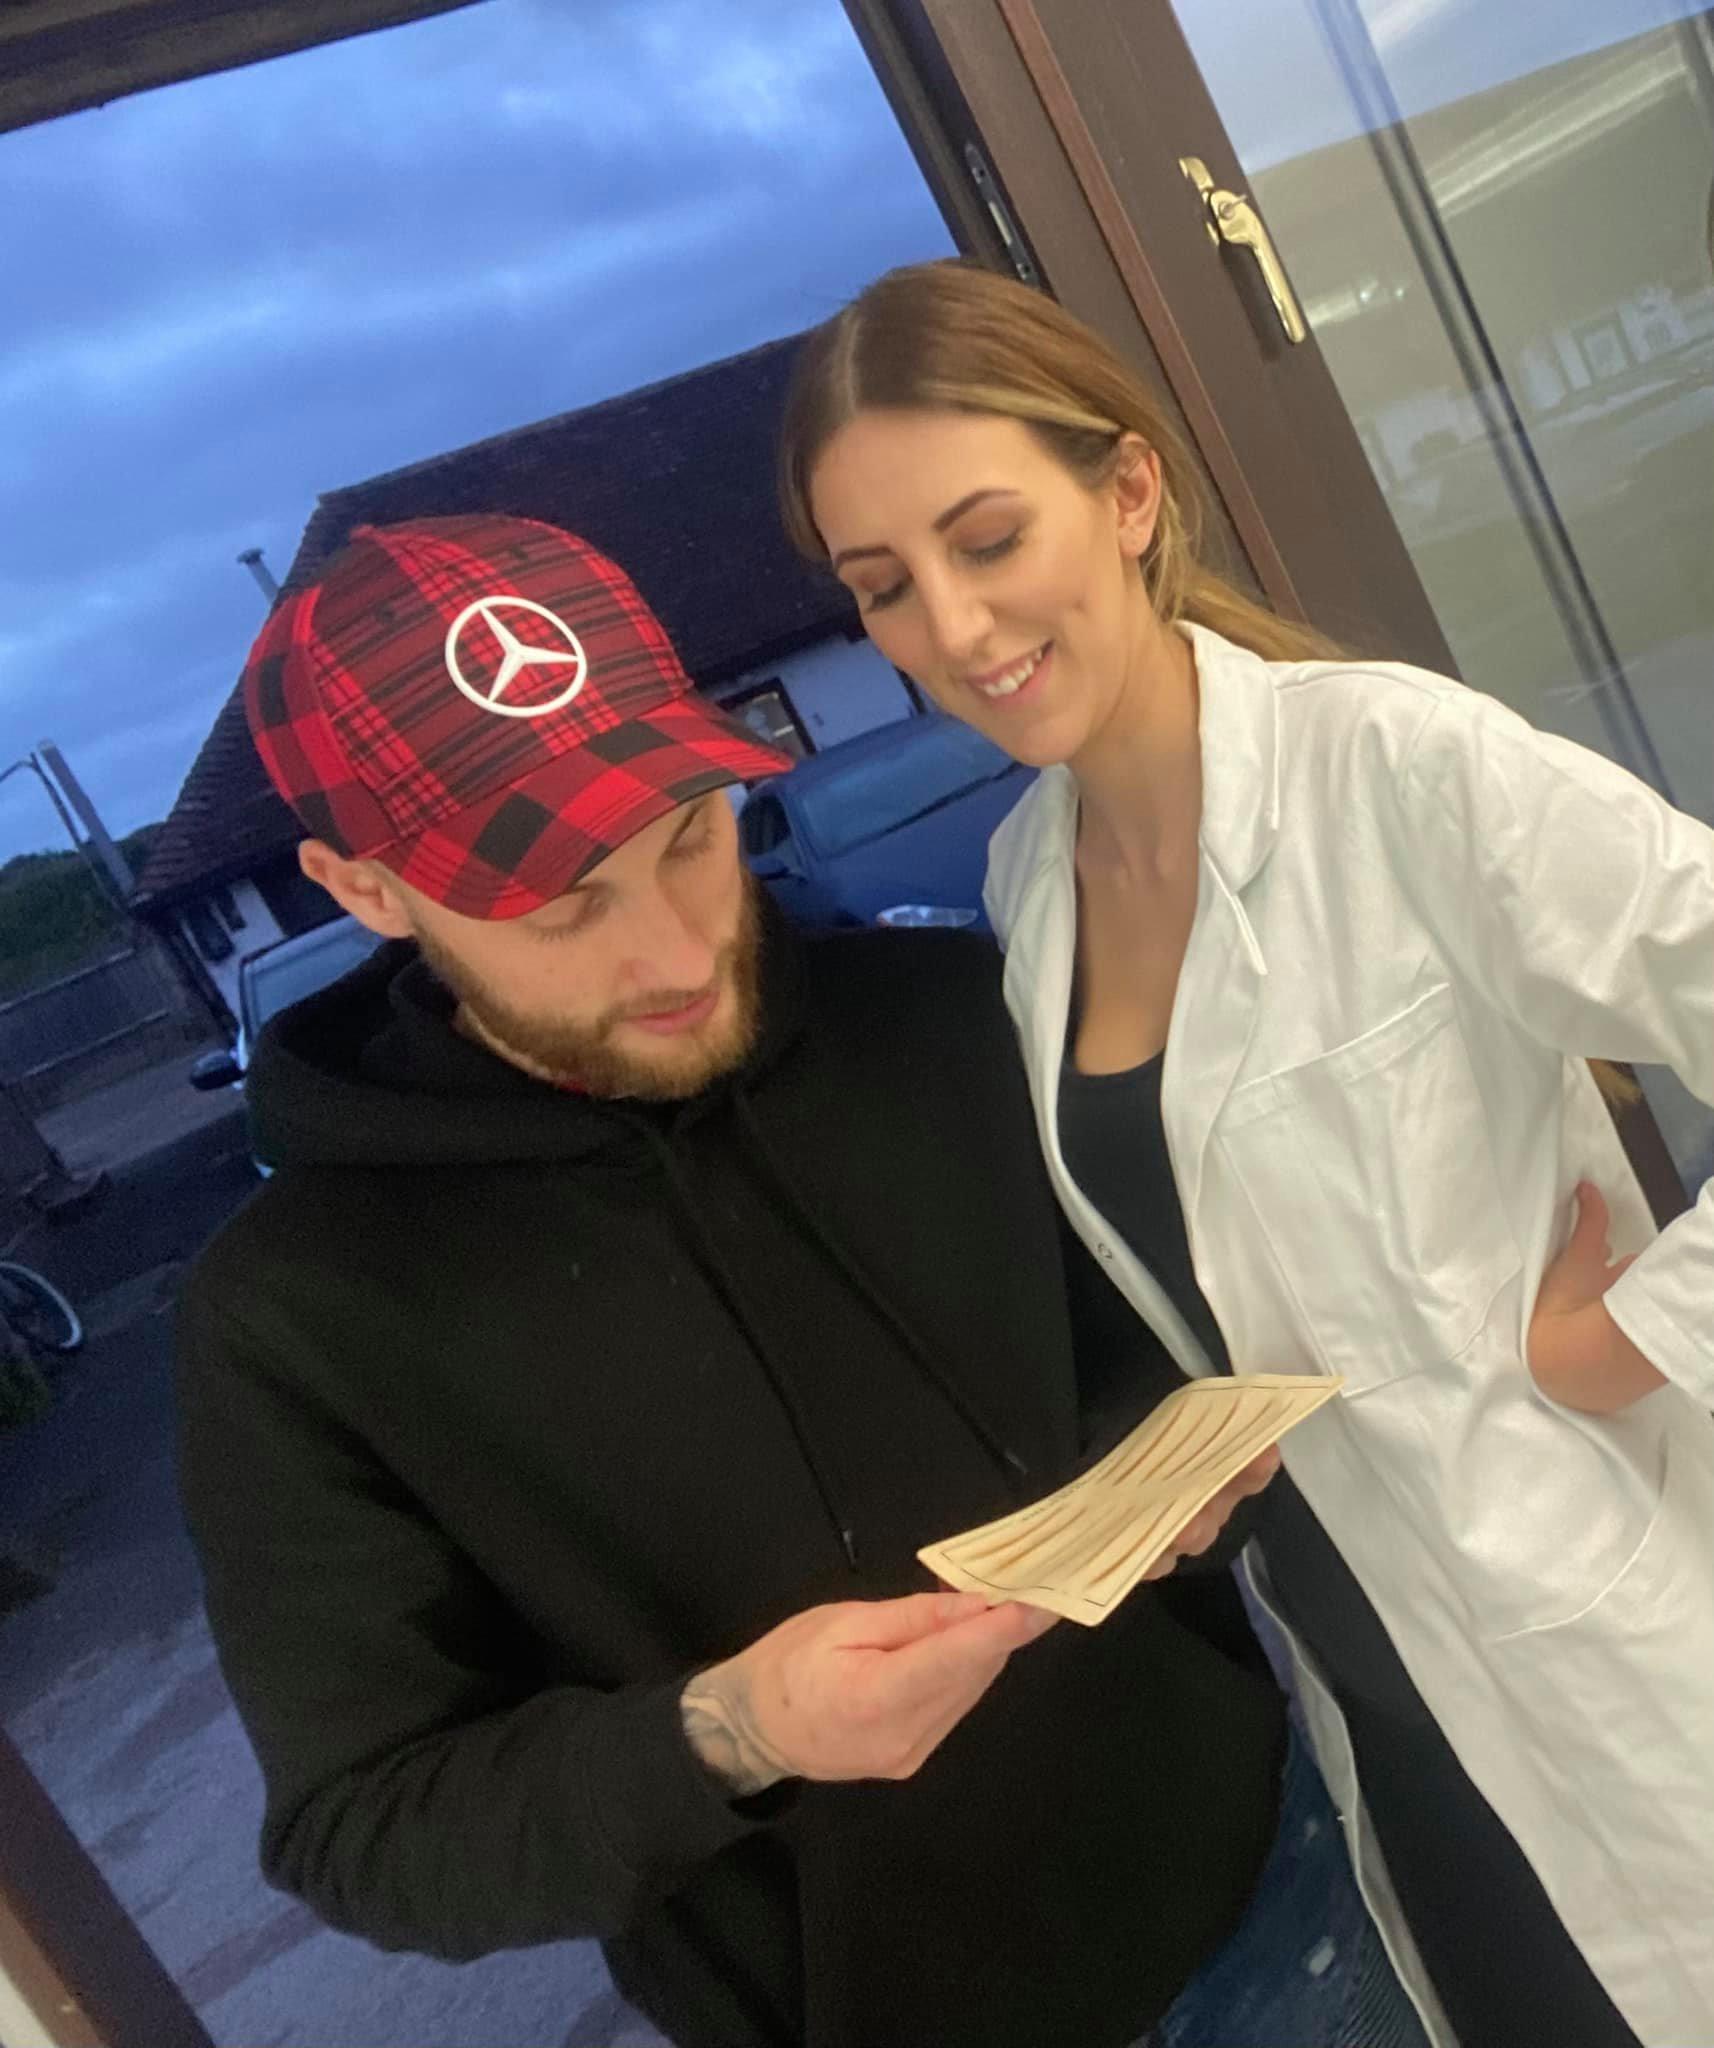 Jenna with her husband as he looks at her impressive results